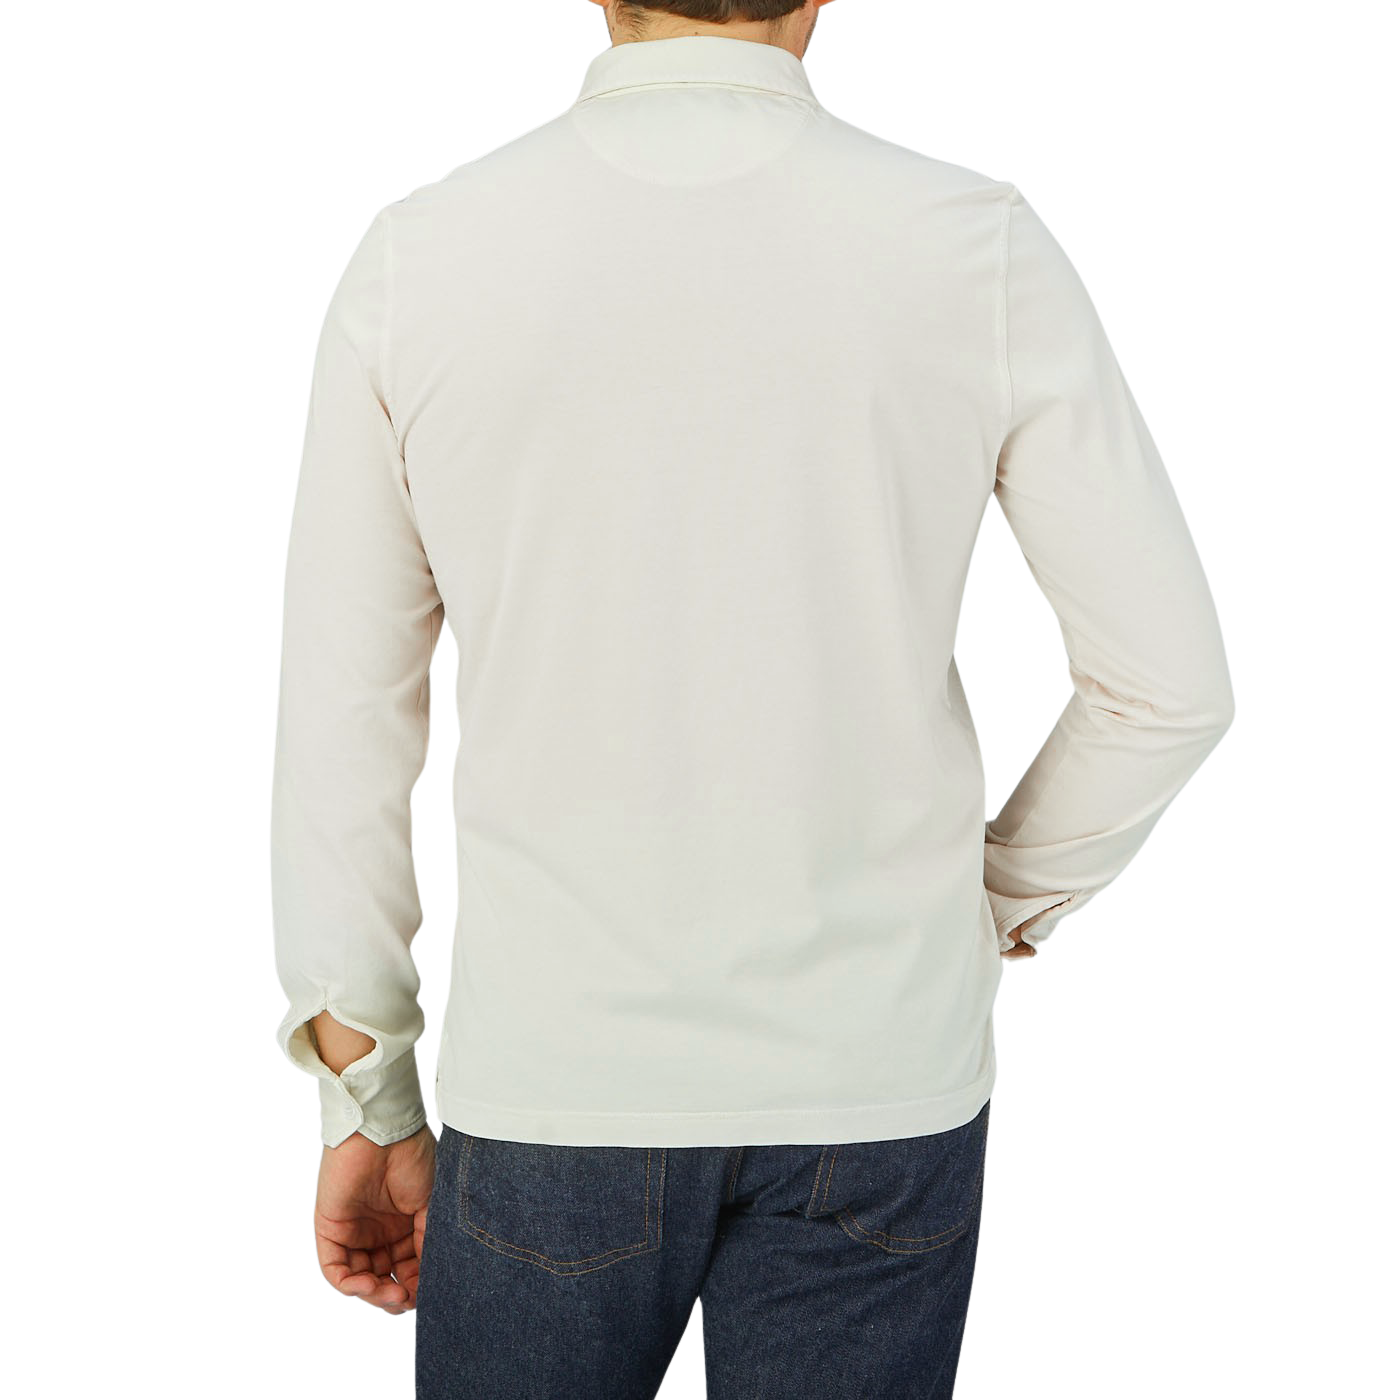 The back view of a man wearing a luxurious Cream Beige Organic Cotton LS Polo Shirt made by Fedeli.